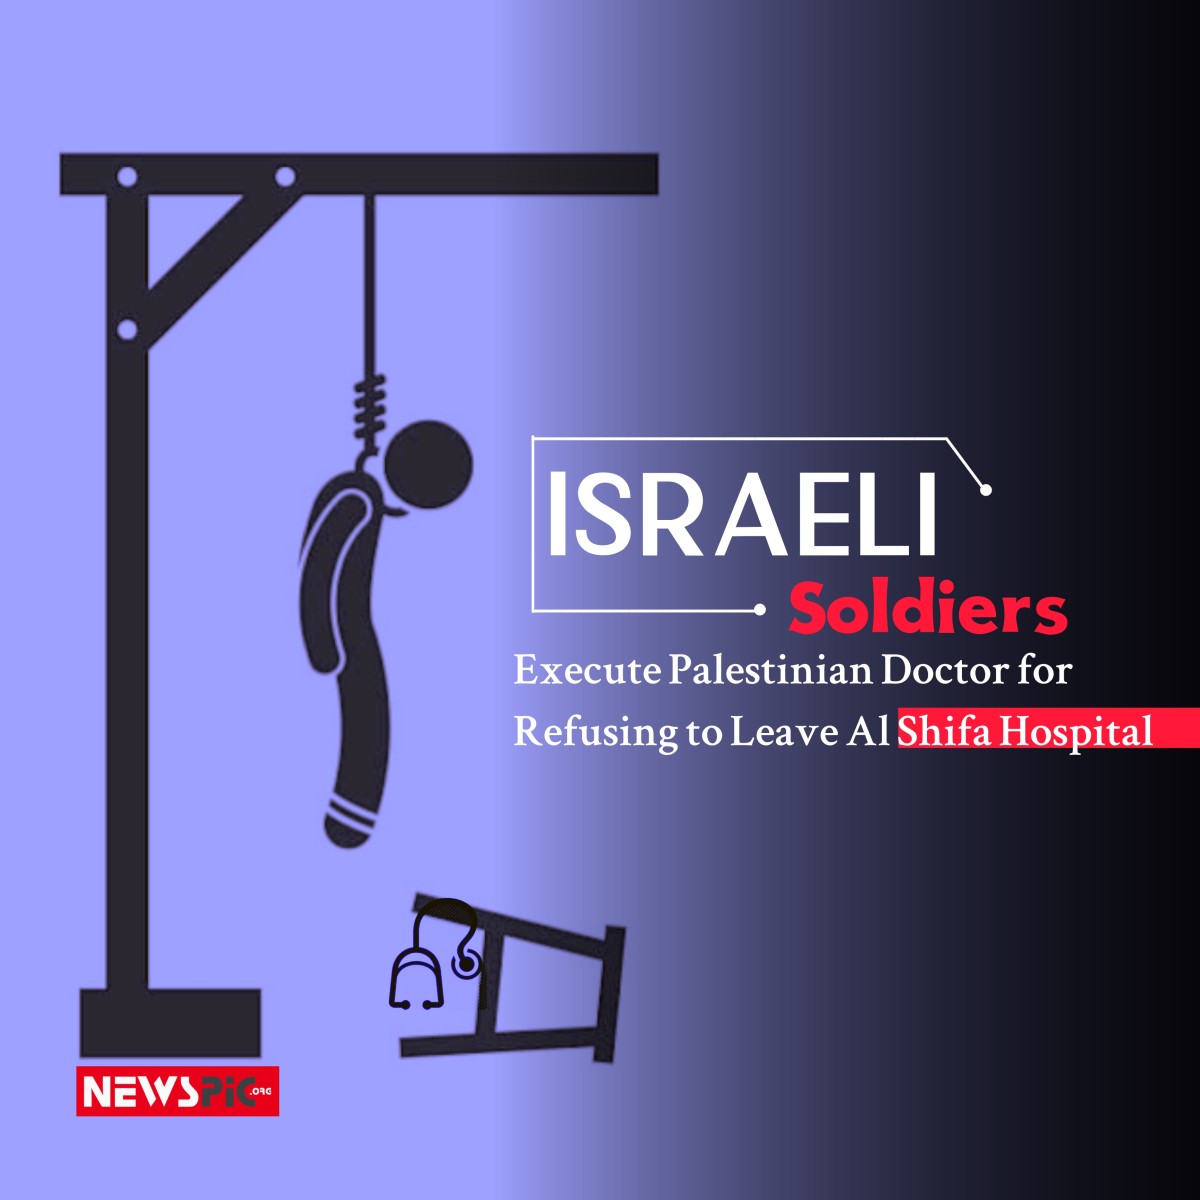 Execute Palestinian Doctor for Refusing to Leave Al Shifa Hospital